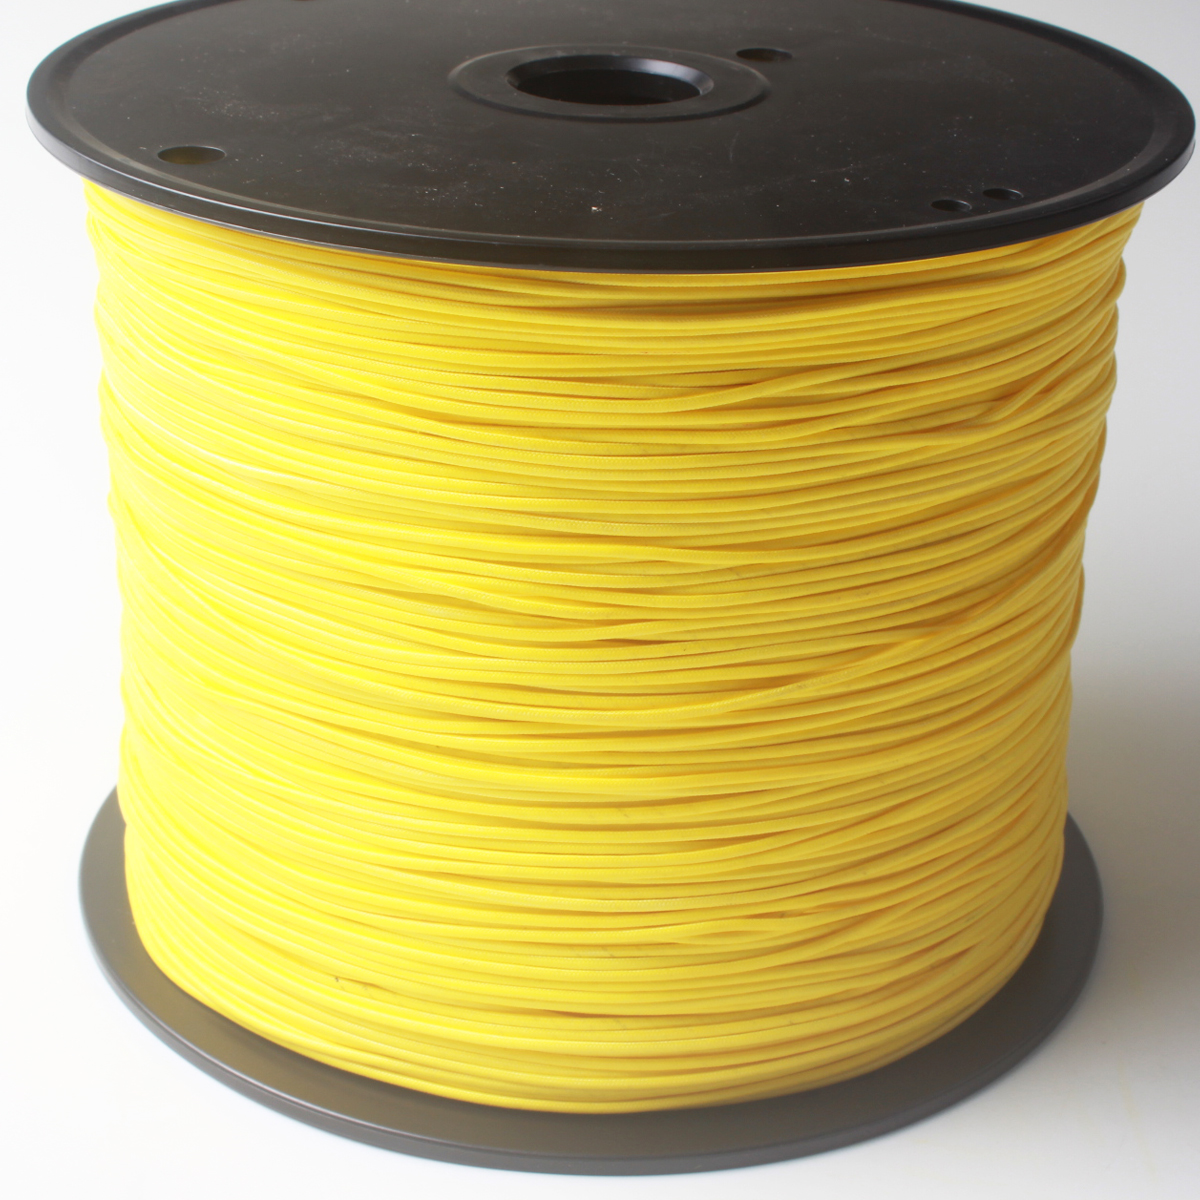 2mm UHMWPE Core with uhmwpe Jacket Rope for Spearfishing